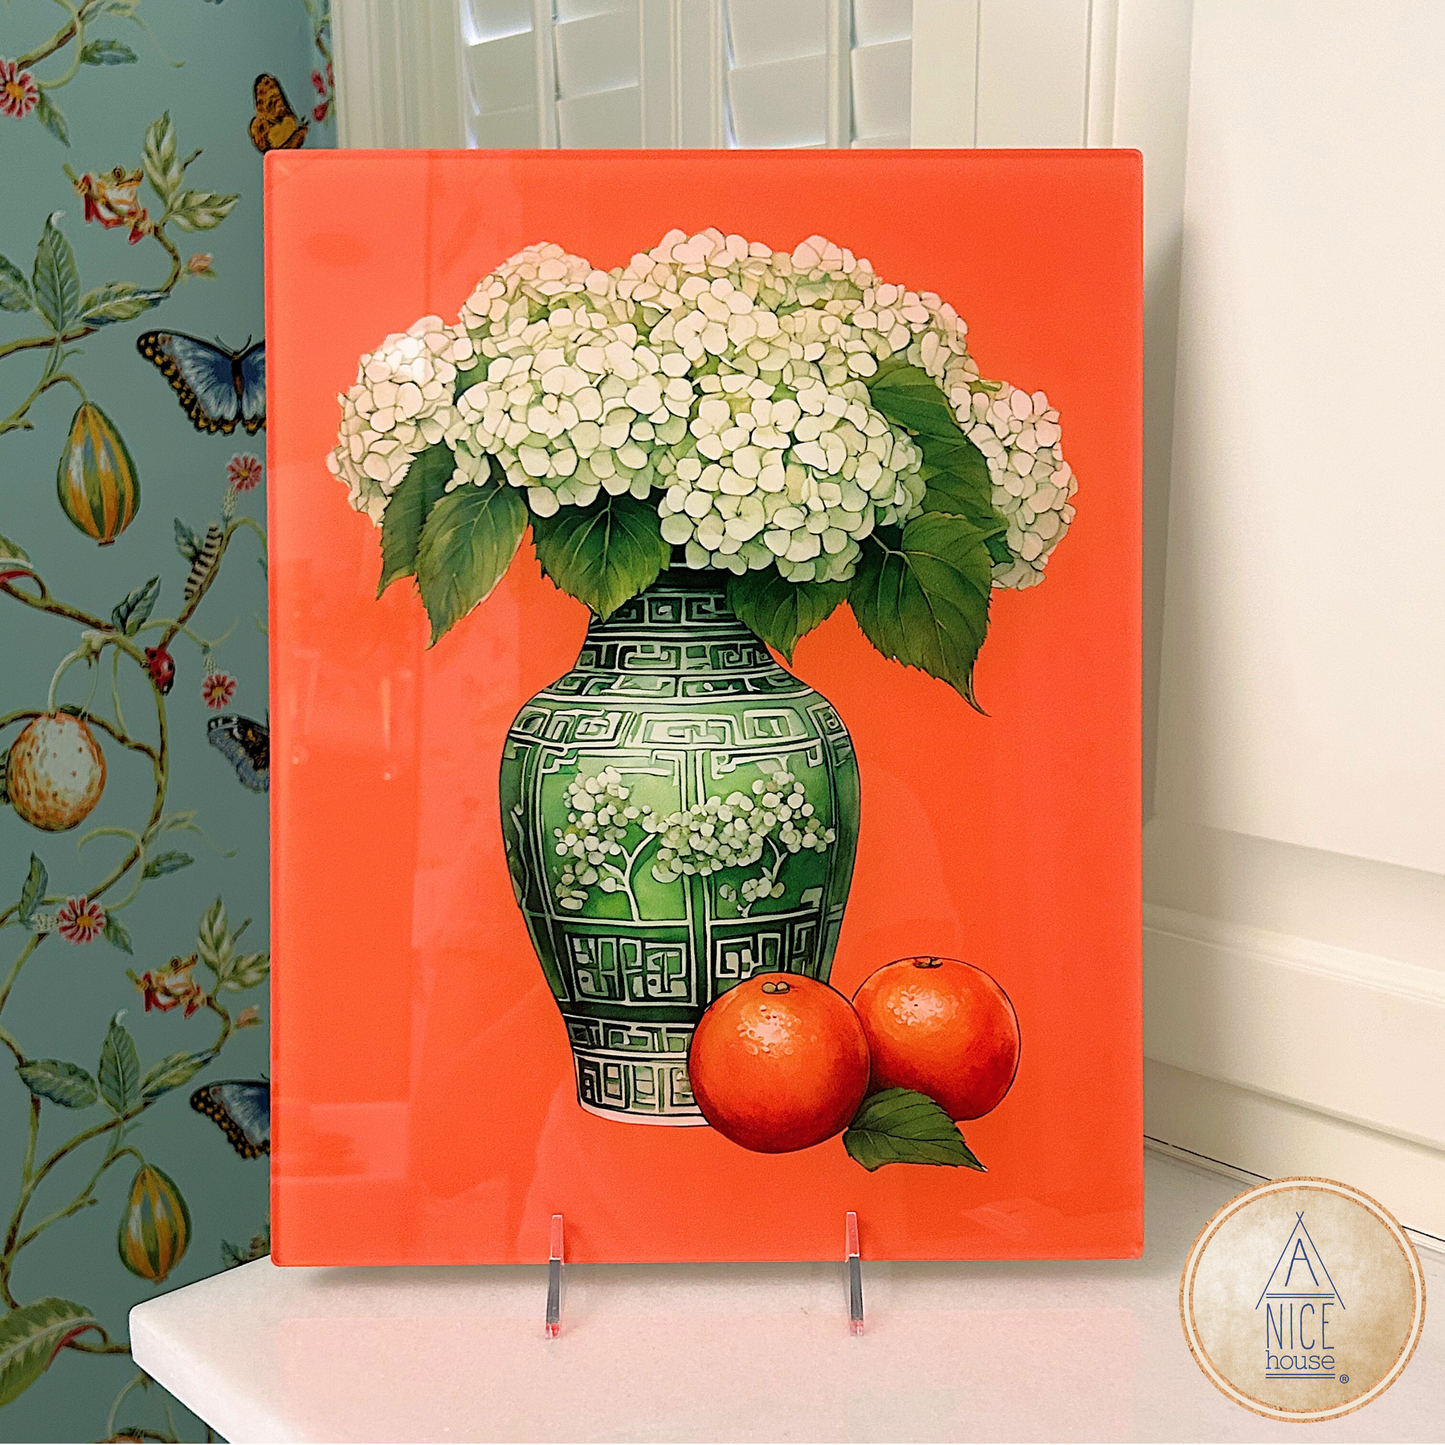 Hydrangea Wall Art - Ready to Hang Acrylic Print - Orange and Green Chinoiserie Wall Art Print with White Hydrangeas and Oranges